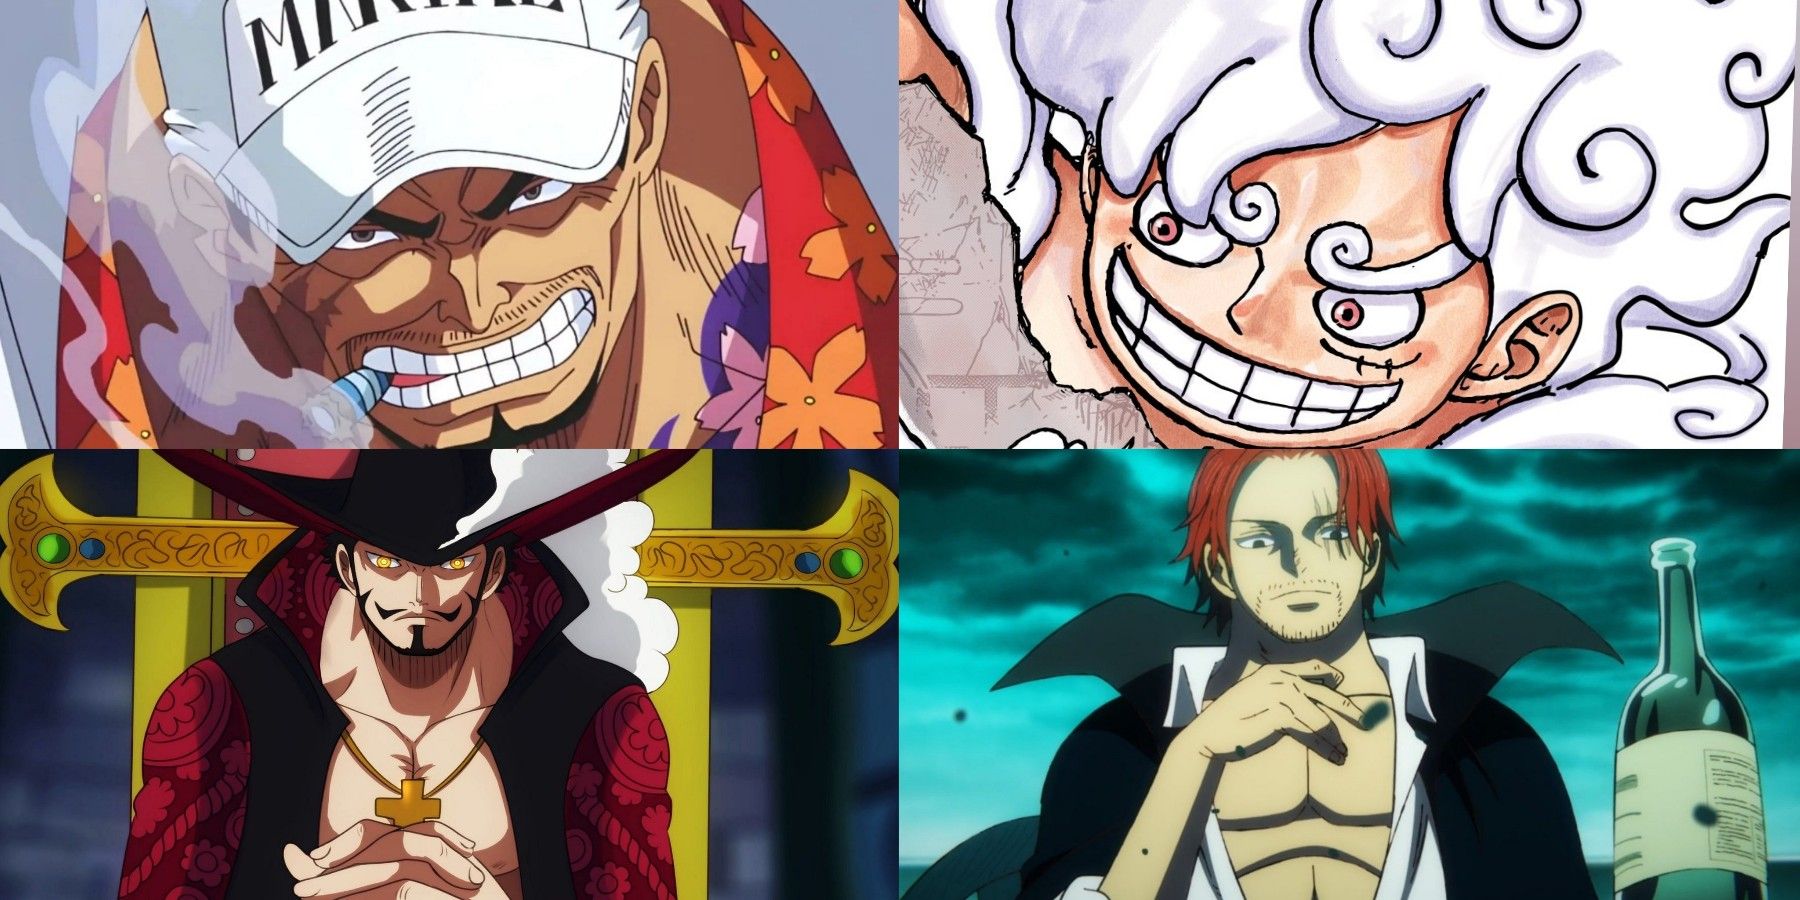 featured one piece most important fights in the final saga luffy Akainu mihawk shanks